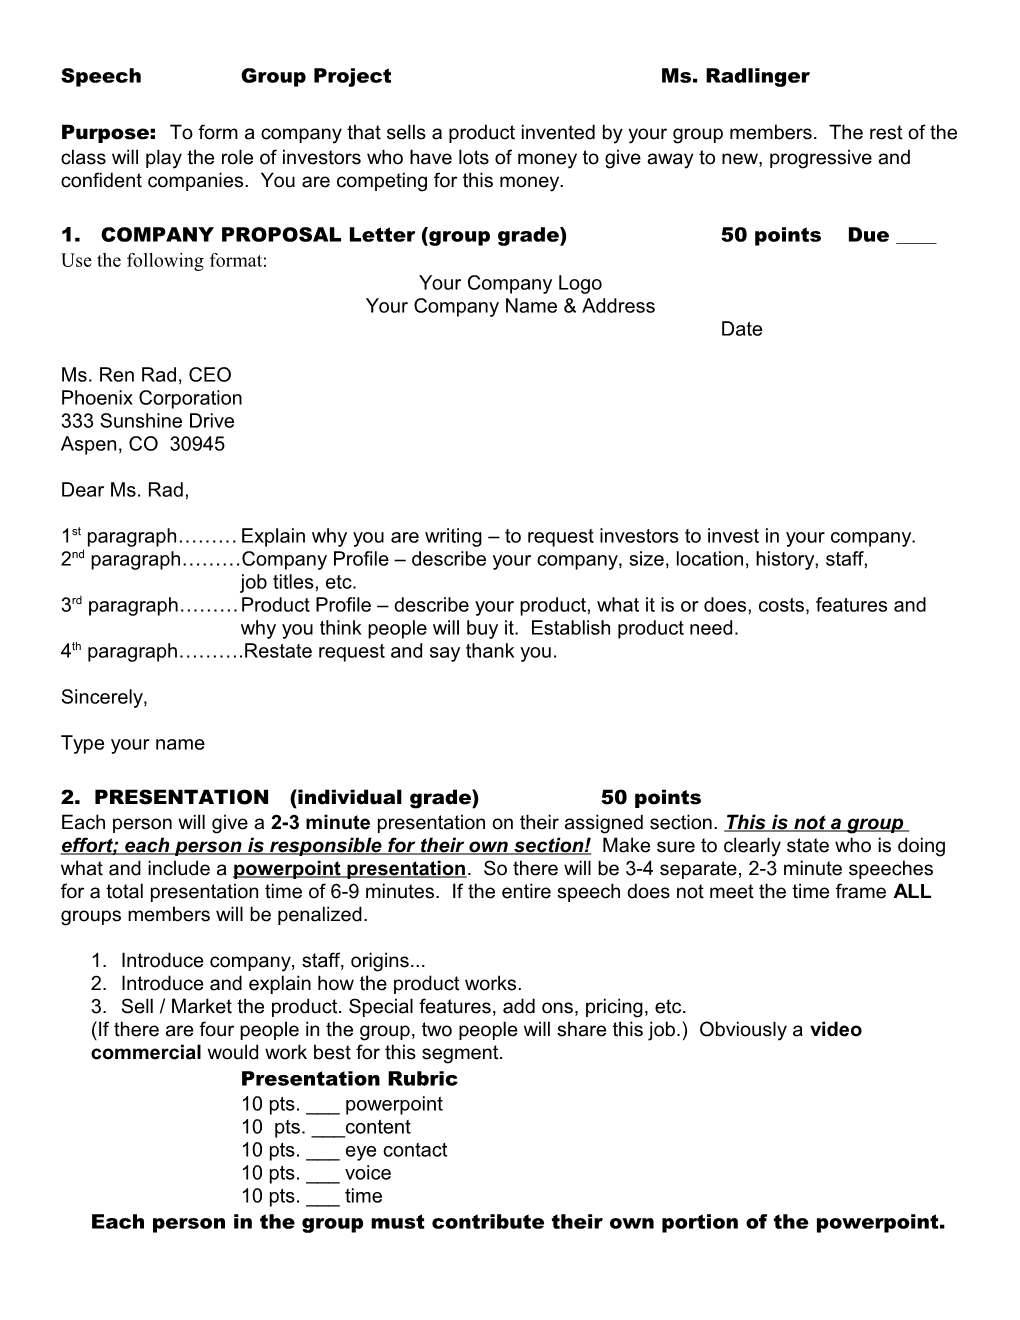 1. COMPANY PROPOSAL Letter(Group Grade)50 Points Due ____